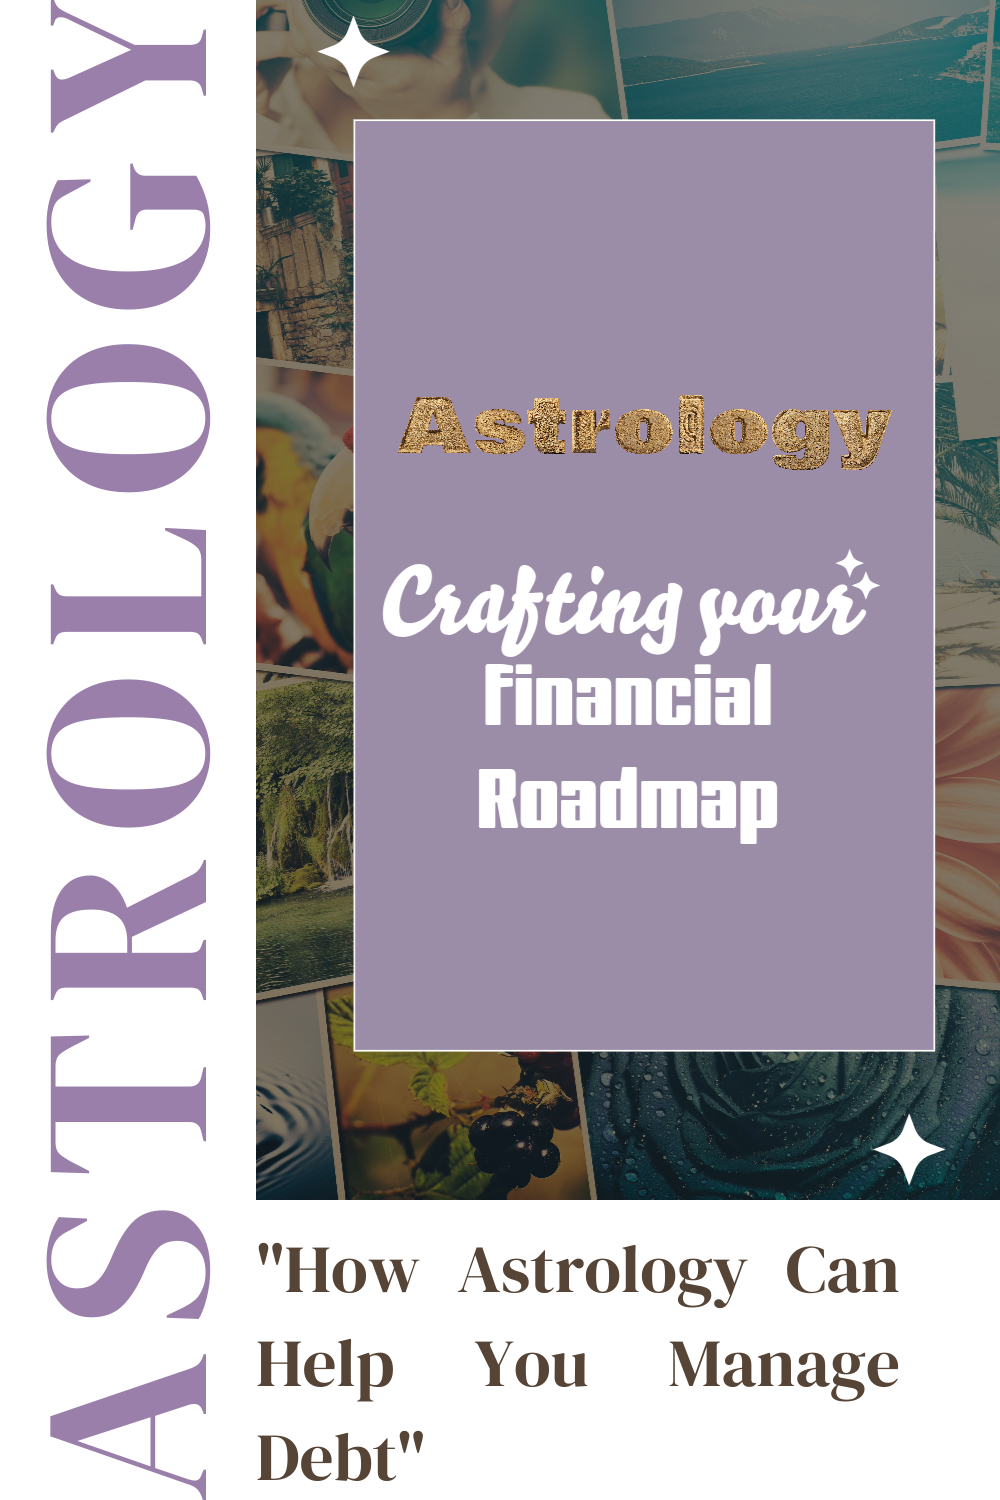 How to Clear Debt Using Astrological Houses